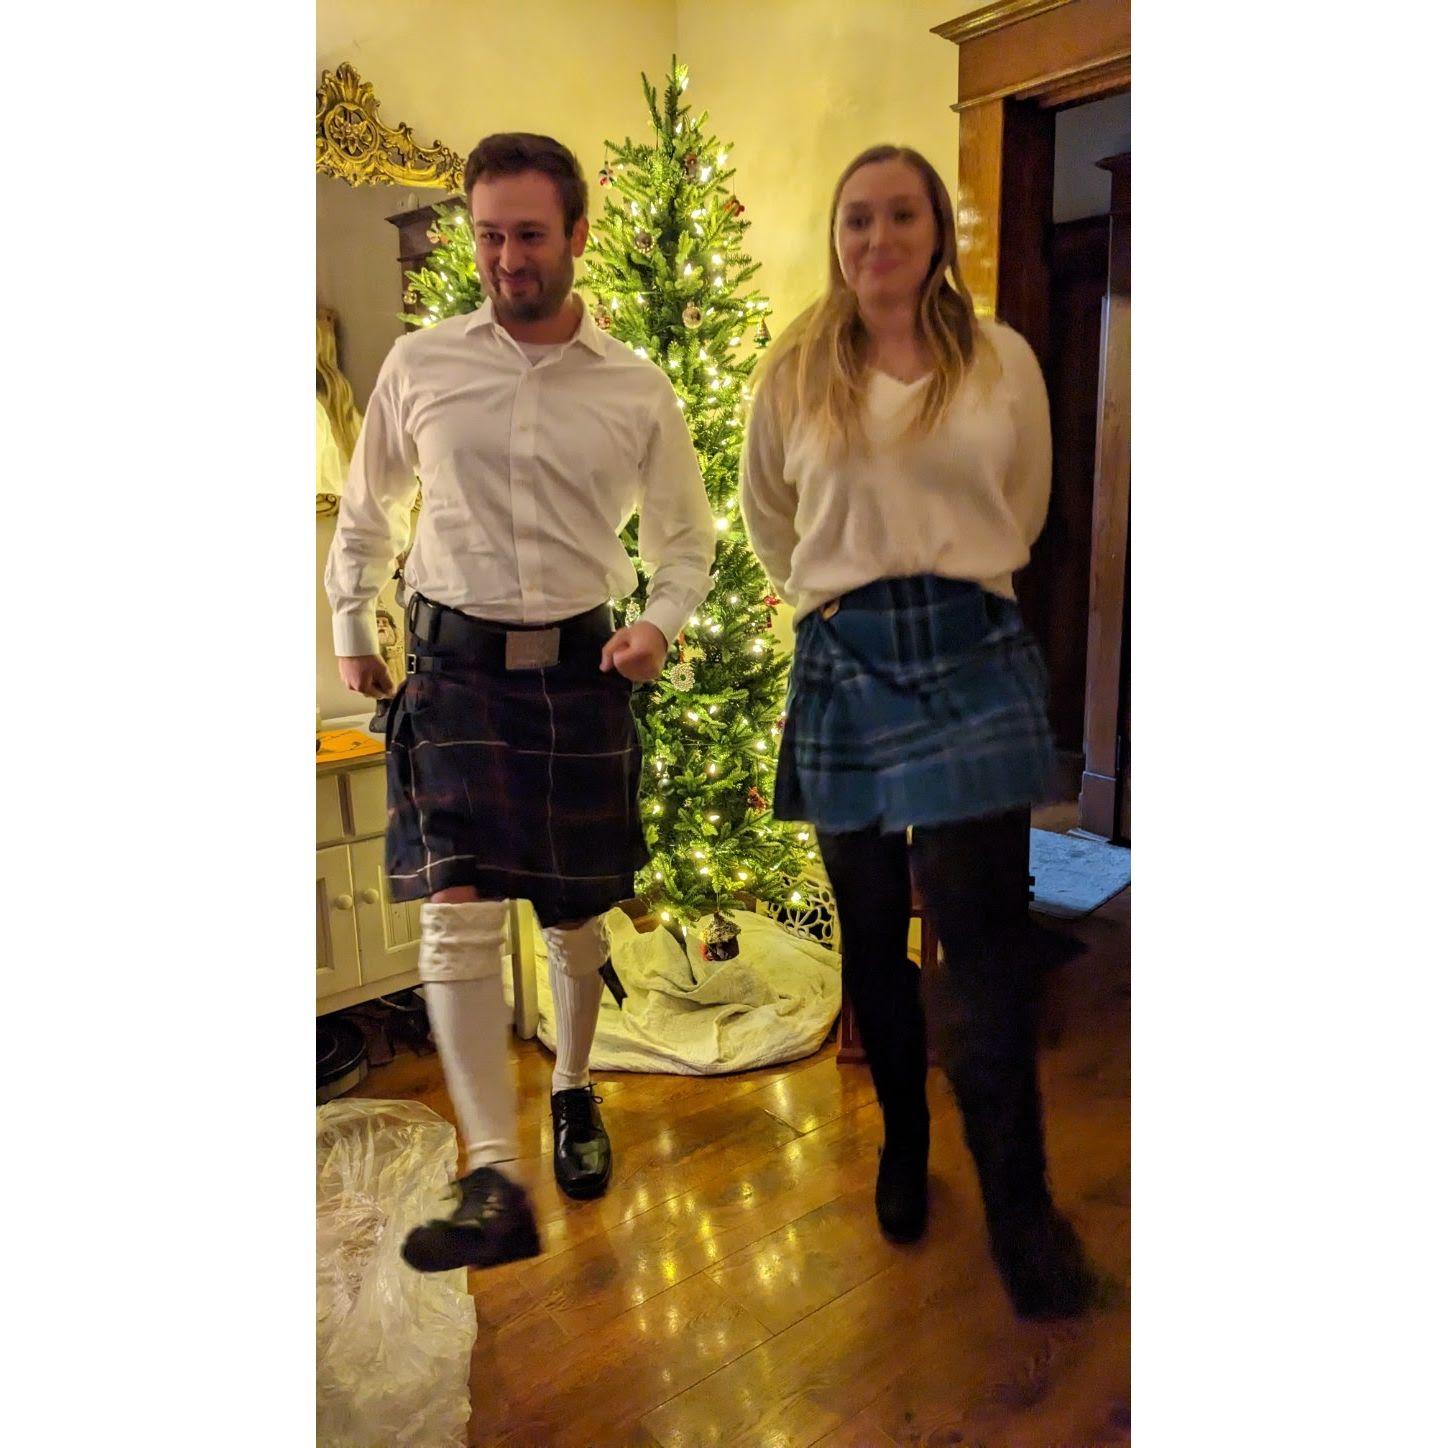 Performing an authentic Irish Jig, Christmas Eve 2022